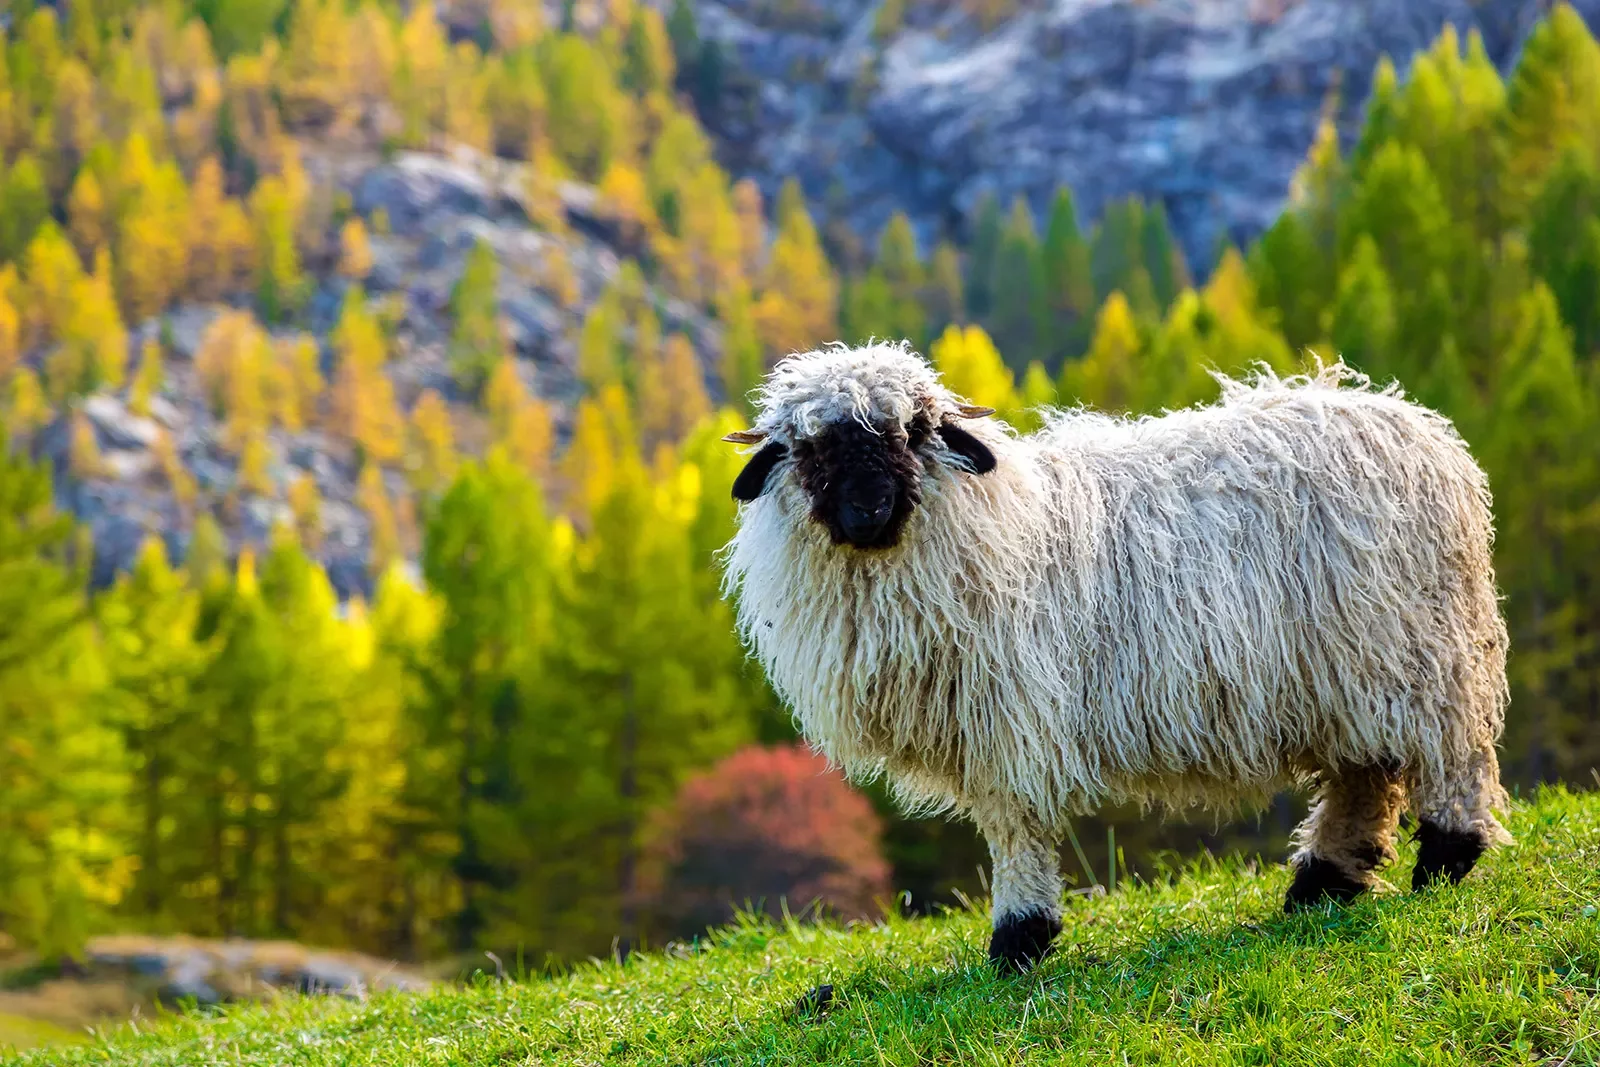 Long haired sheep standing on a green grassy hill